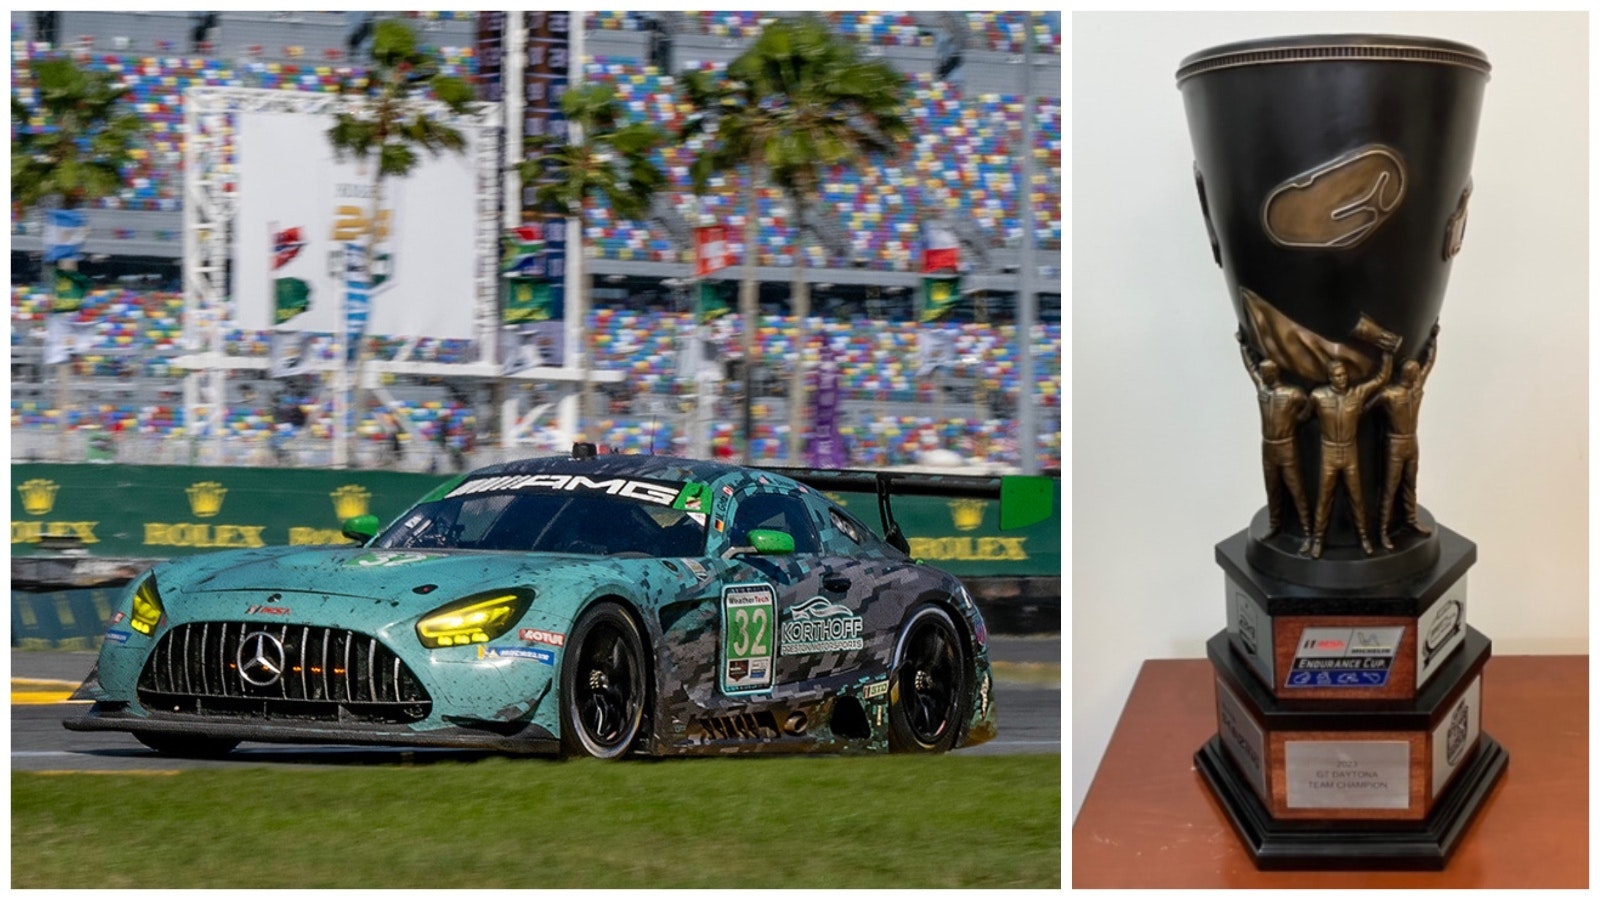 Wyoming-based Korthoff Racing's No. 32 car won the IMSA Michelin Endurance Cup for the Grand Touring Daytona class in 2023.